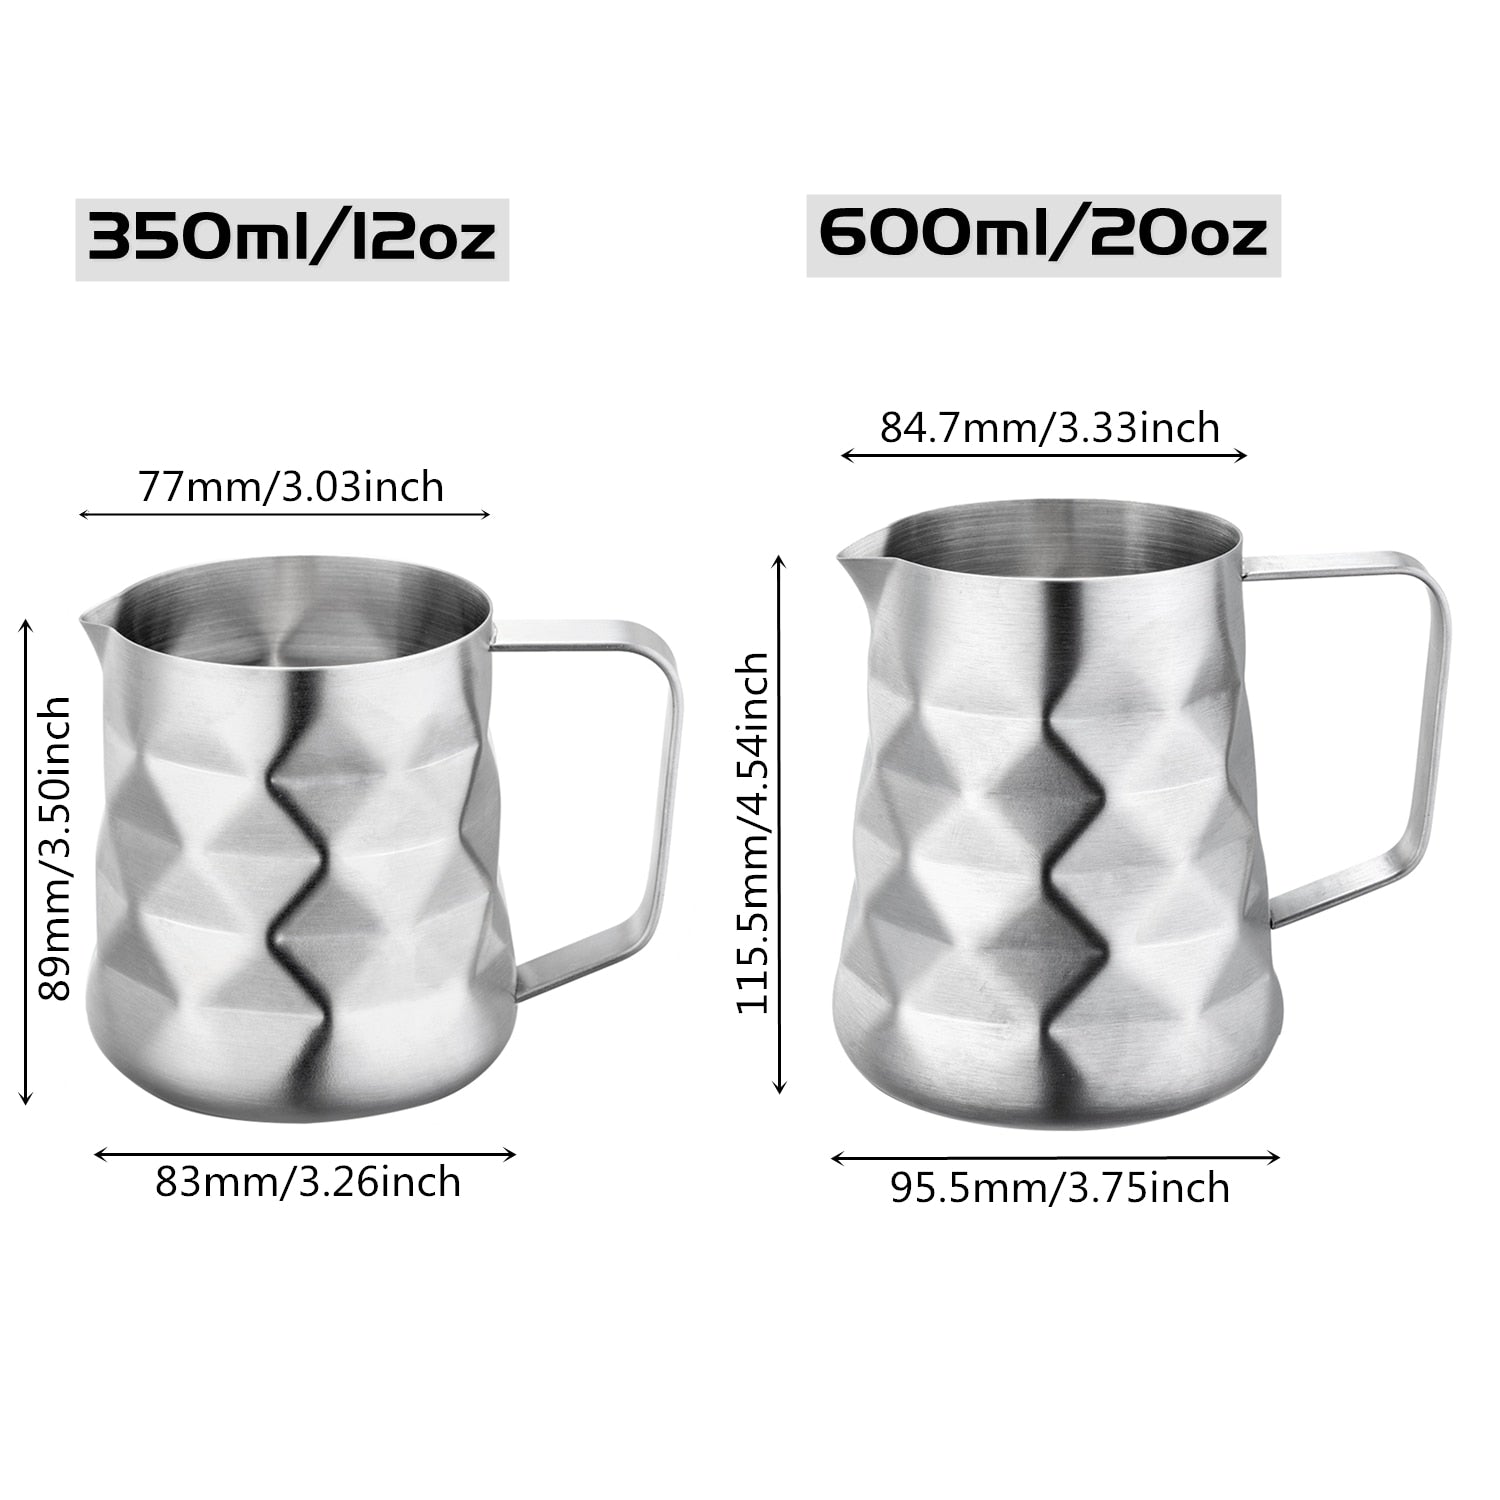 Stainless Steel Prism Design Frothing Pitcher Measurements Available In 12oz And 20oz Sizes